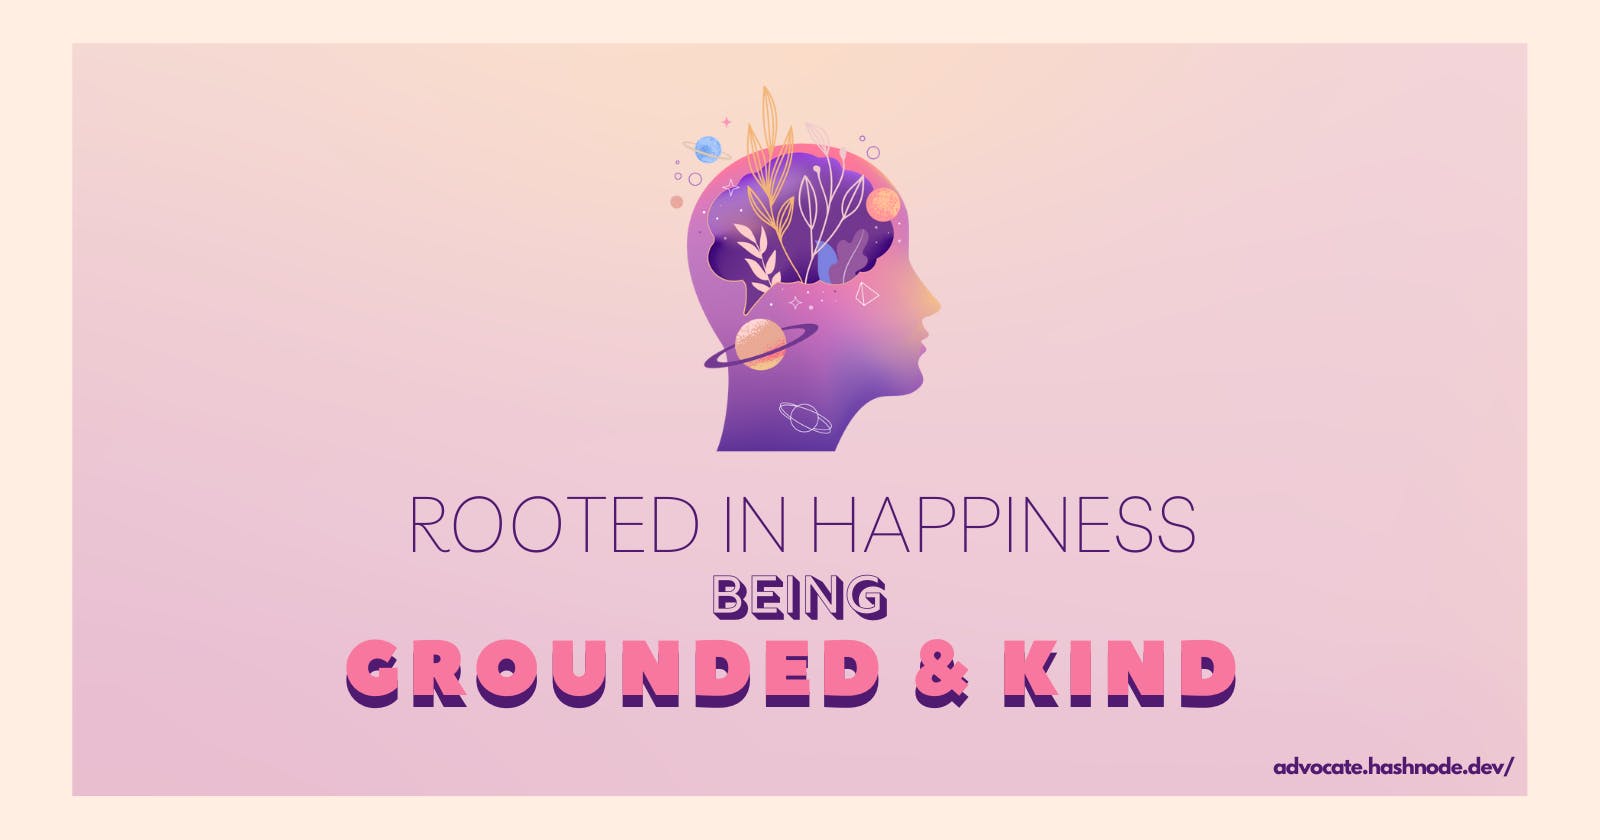 Rooted in happiness: Being Grounded and Kind